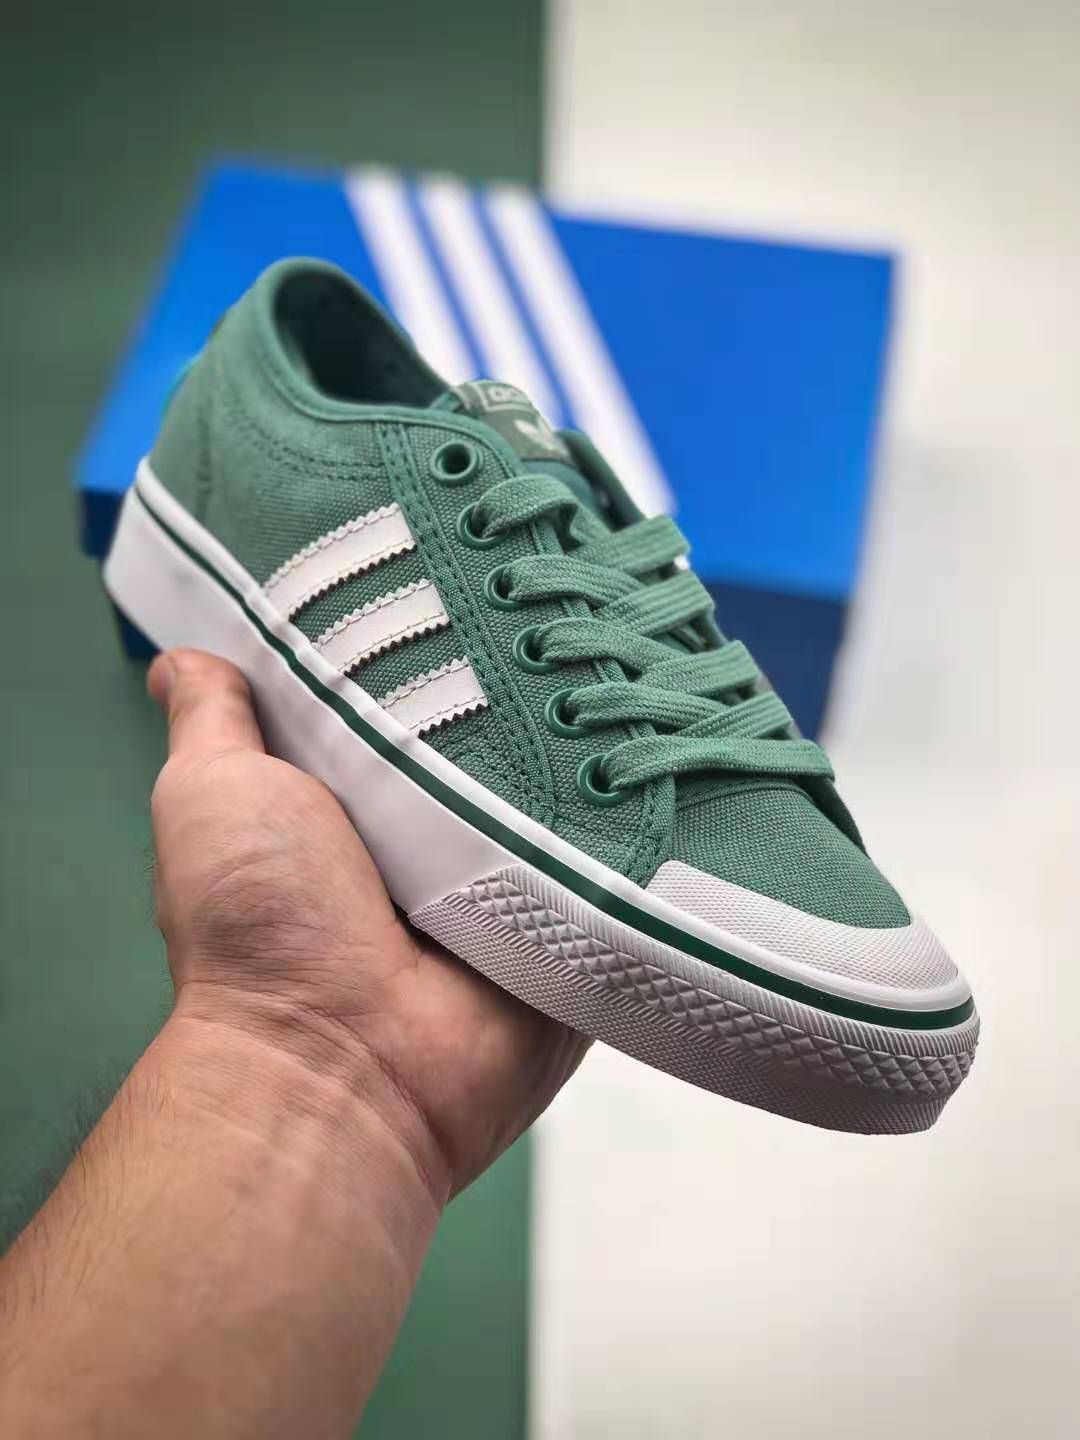 Adidas Originals Nizza Green CQ2329 Sneakers: Classic Style with a Fresh Twist